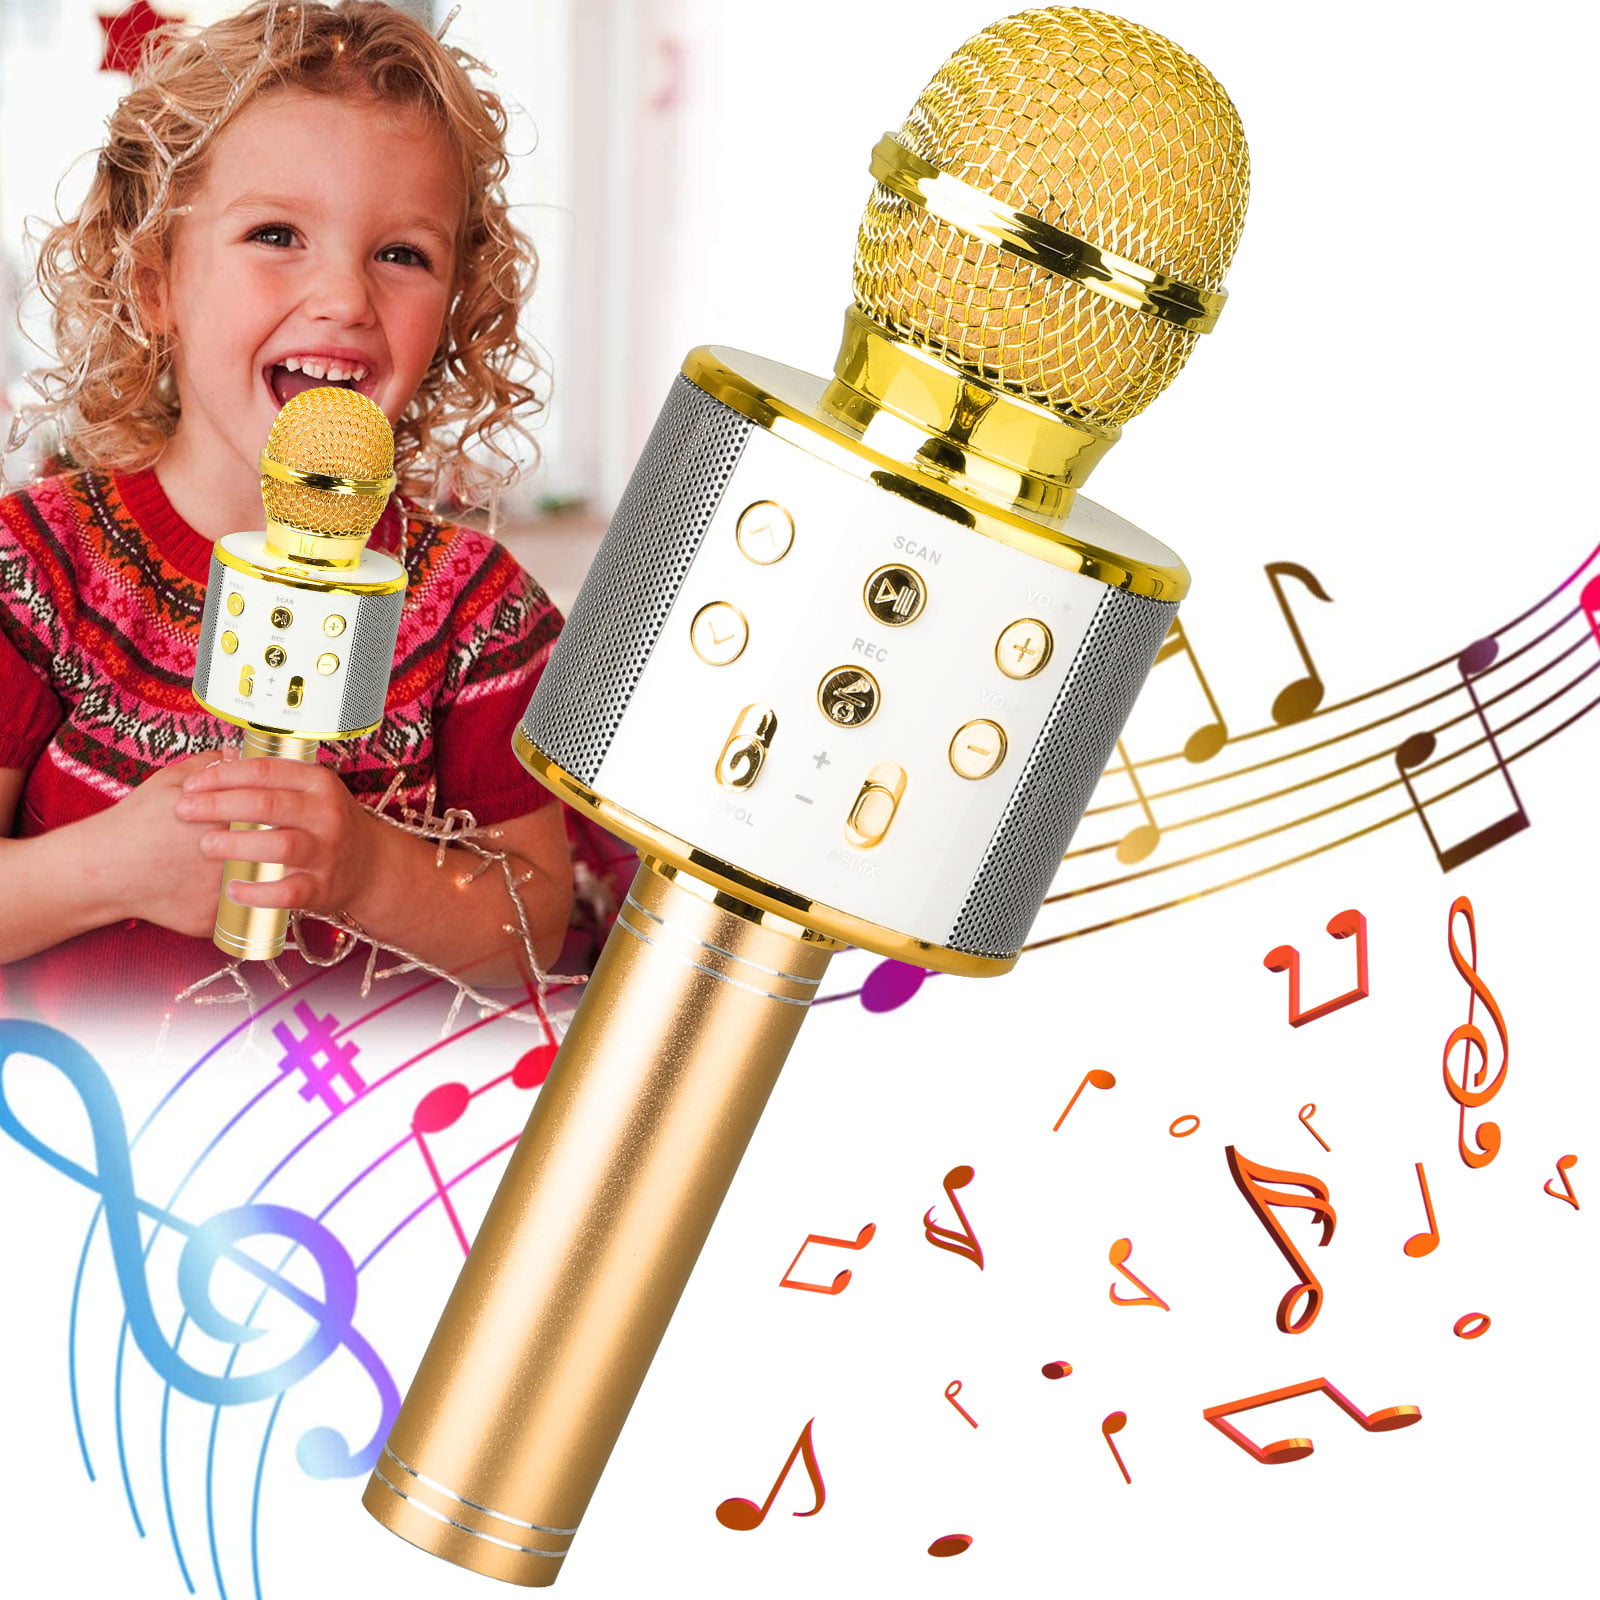 Gaobige Magic Bluetooth Karaoke Microphone for Kids Toddlers Age 1-10 Best Gifts Toys for 1 2 3 4 5 6 7 8 9 Year Old Girls and Boys Blue 